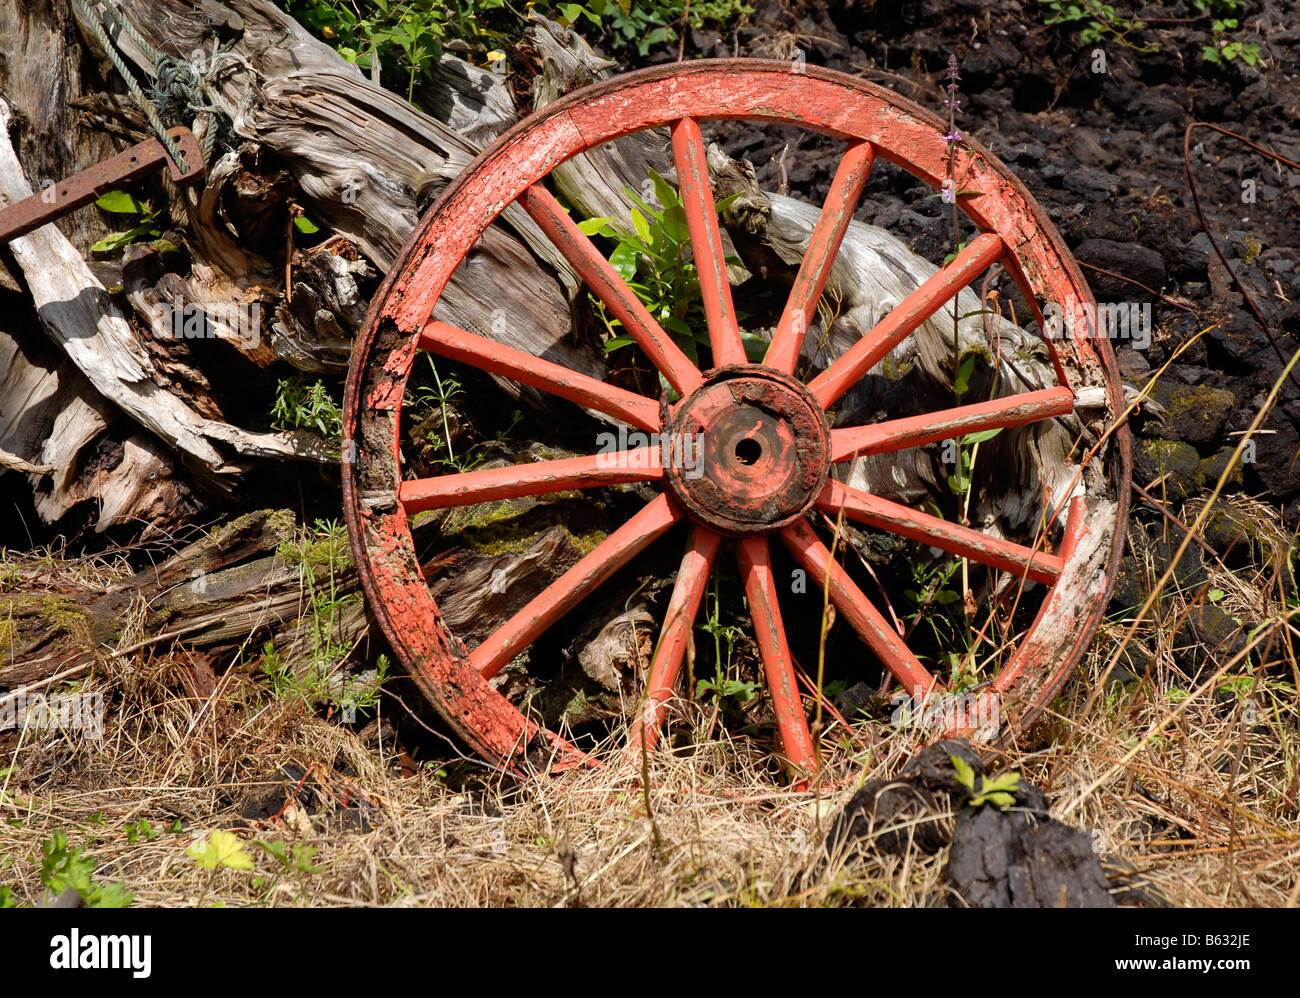 Old cart wheel, painted red but in poor condition, leaning against logs Stock Photo